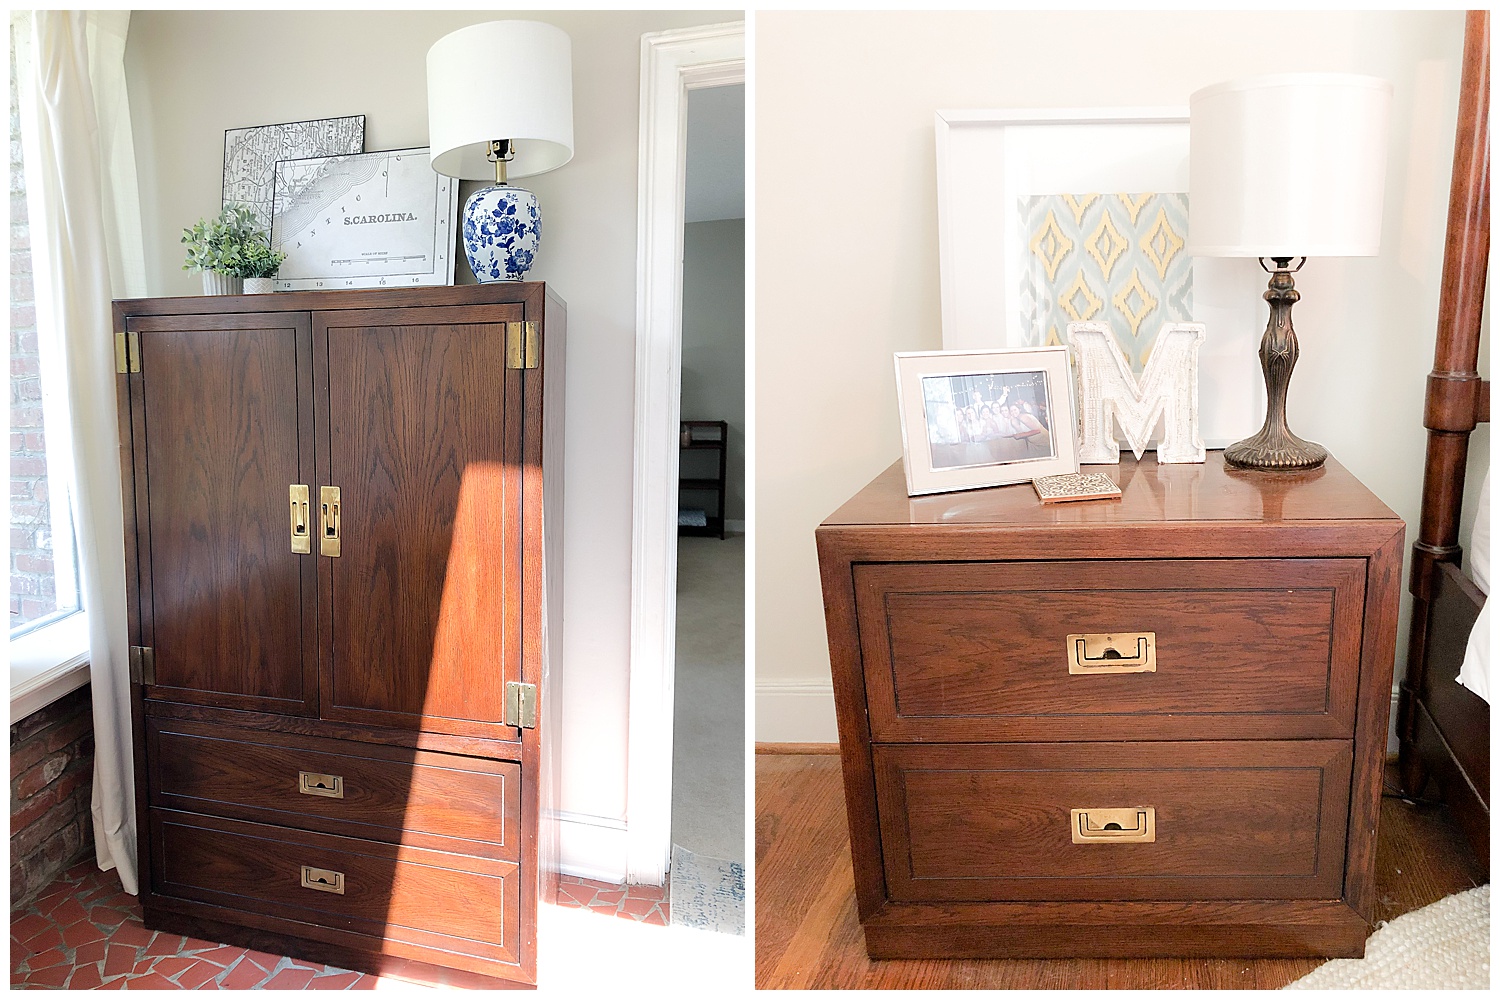 DIXIE ARMOIRE + 2 BEDSIDE TABLES: $150